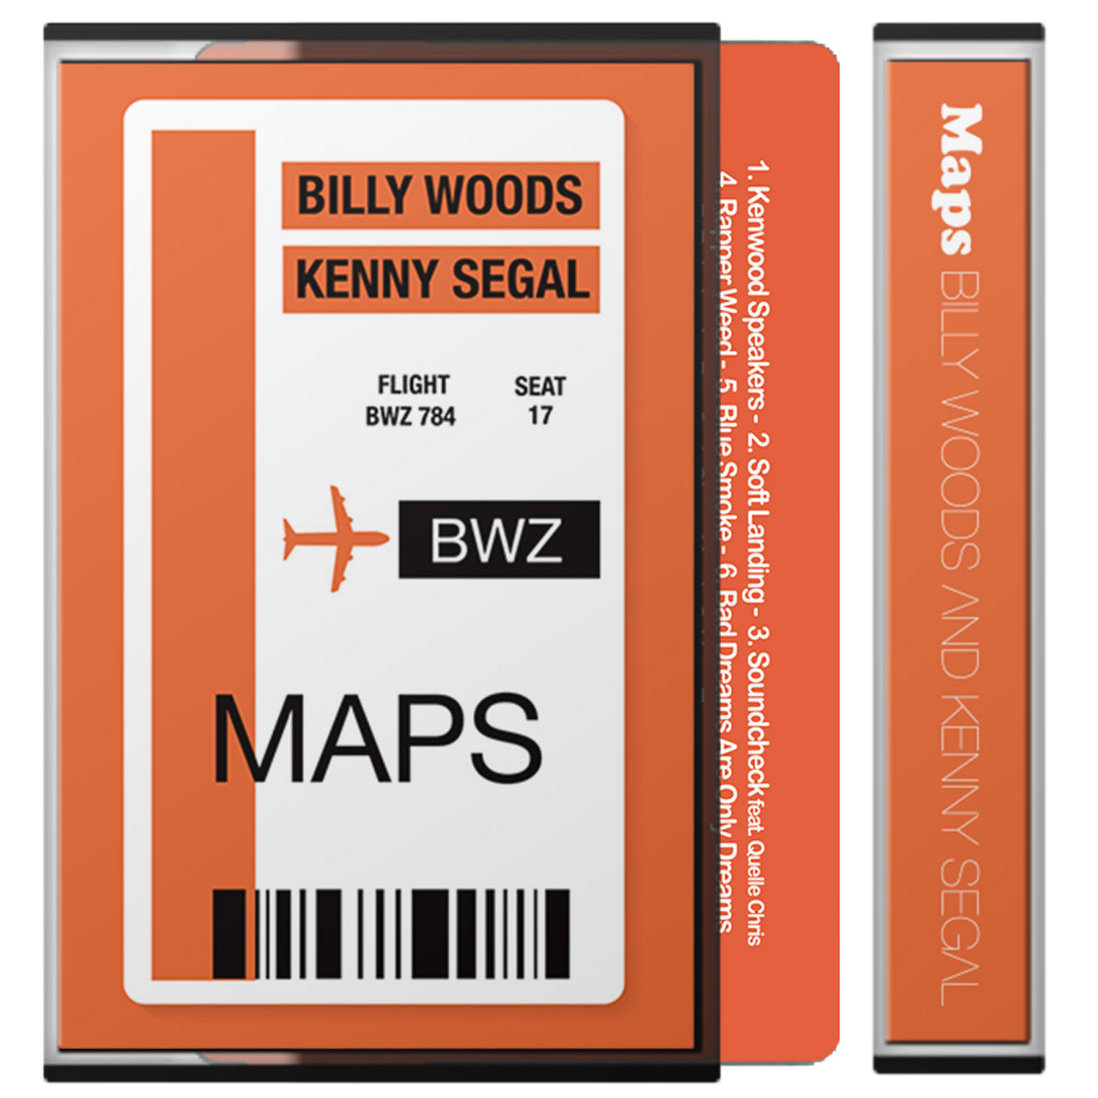 The album artwork for the billy woods & Kenny Segal album Maps, styled like an airplane safety pamphlet